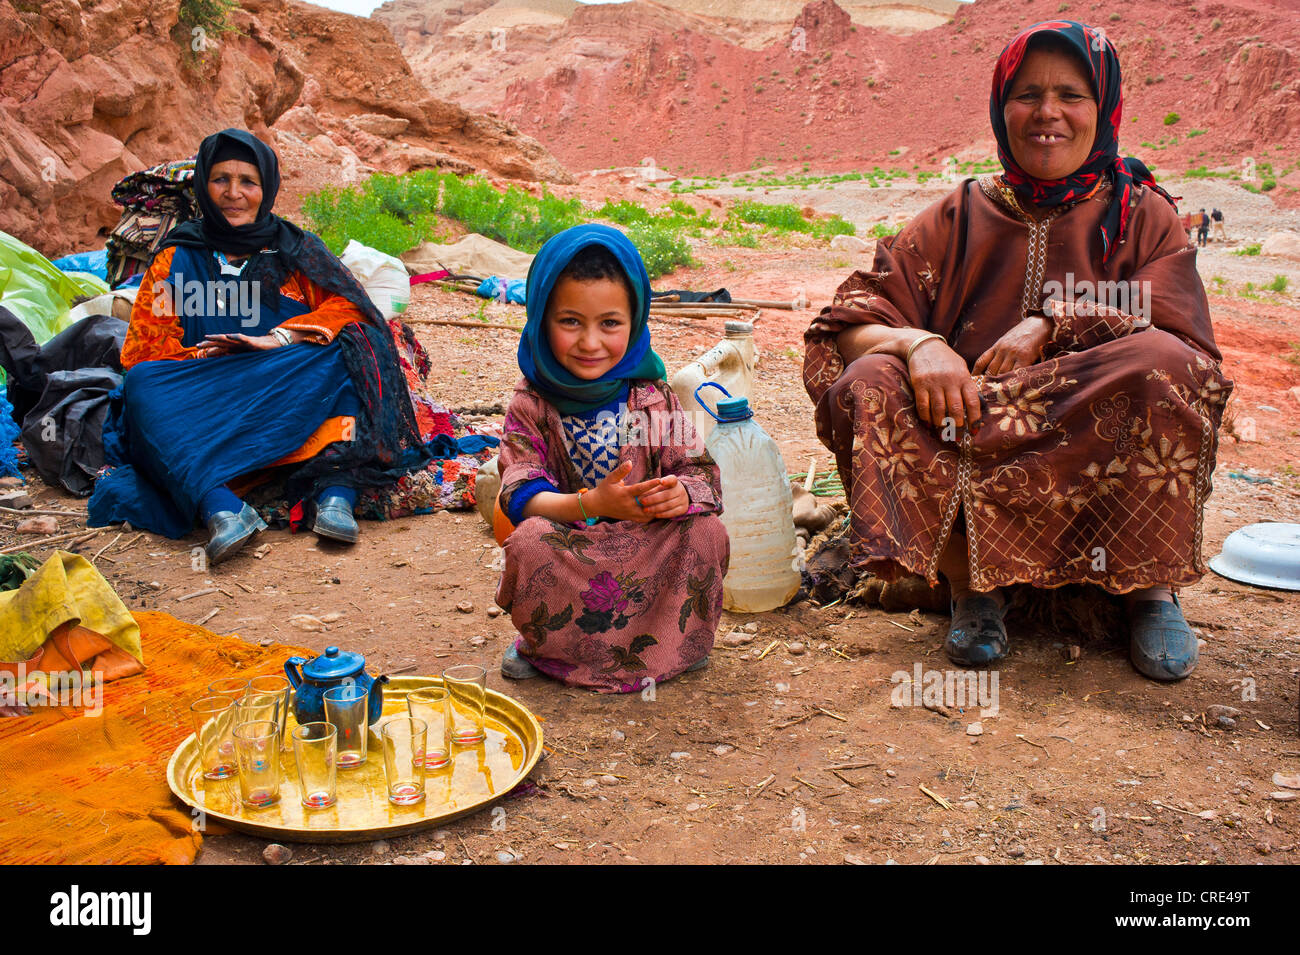 https://c8.alamy.com/comp/CRE49T/cave-dwelling-nomads-two-women-and-a-little-girl-sitting-in-front-CRE49T.jpg